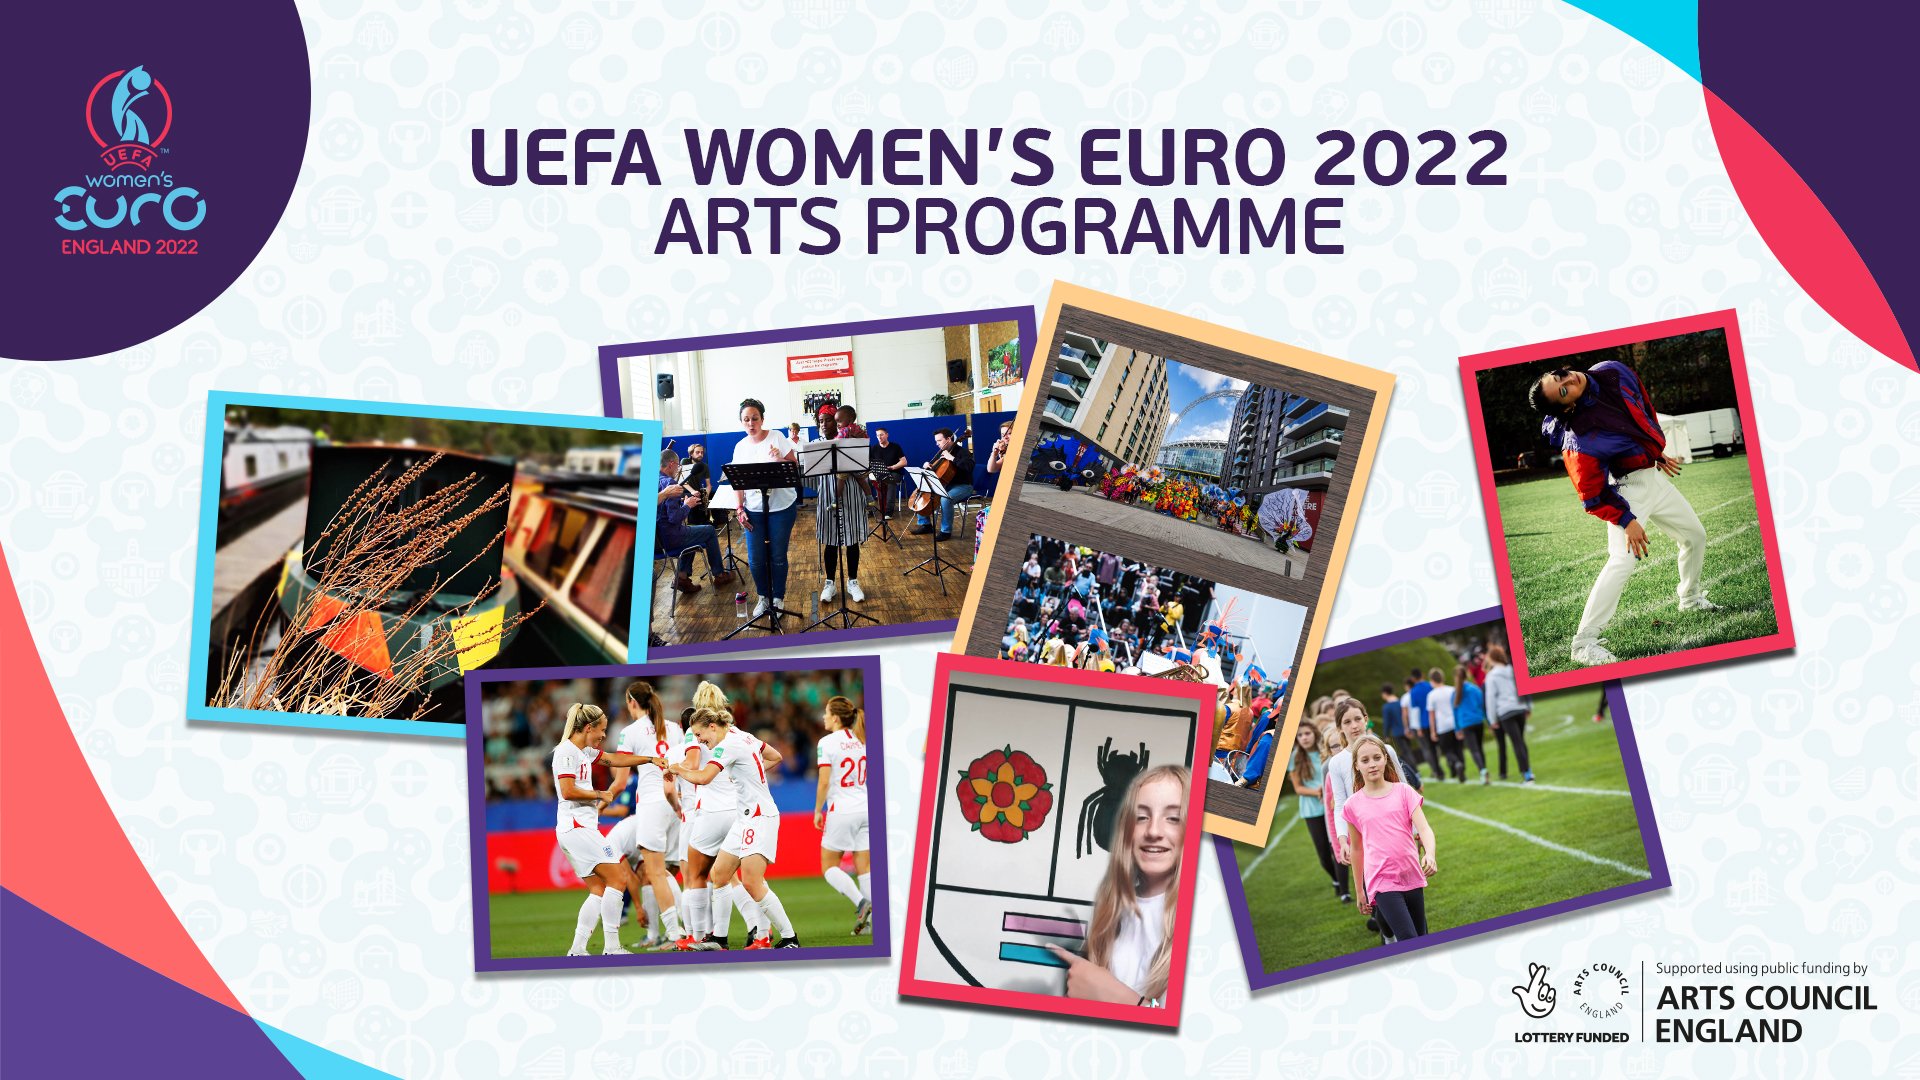 MK to host cultural programme for UEFA Women’s Euros 2022